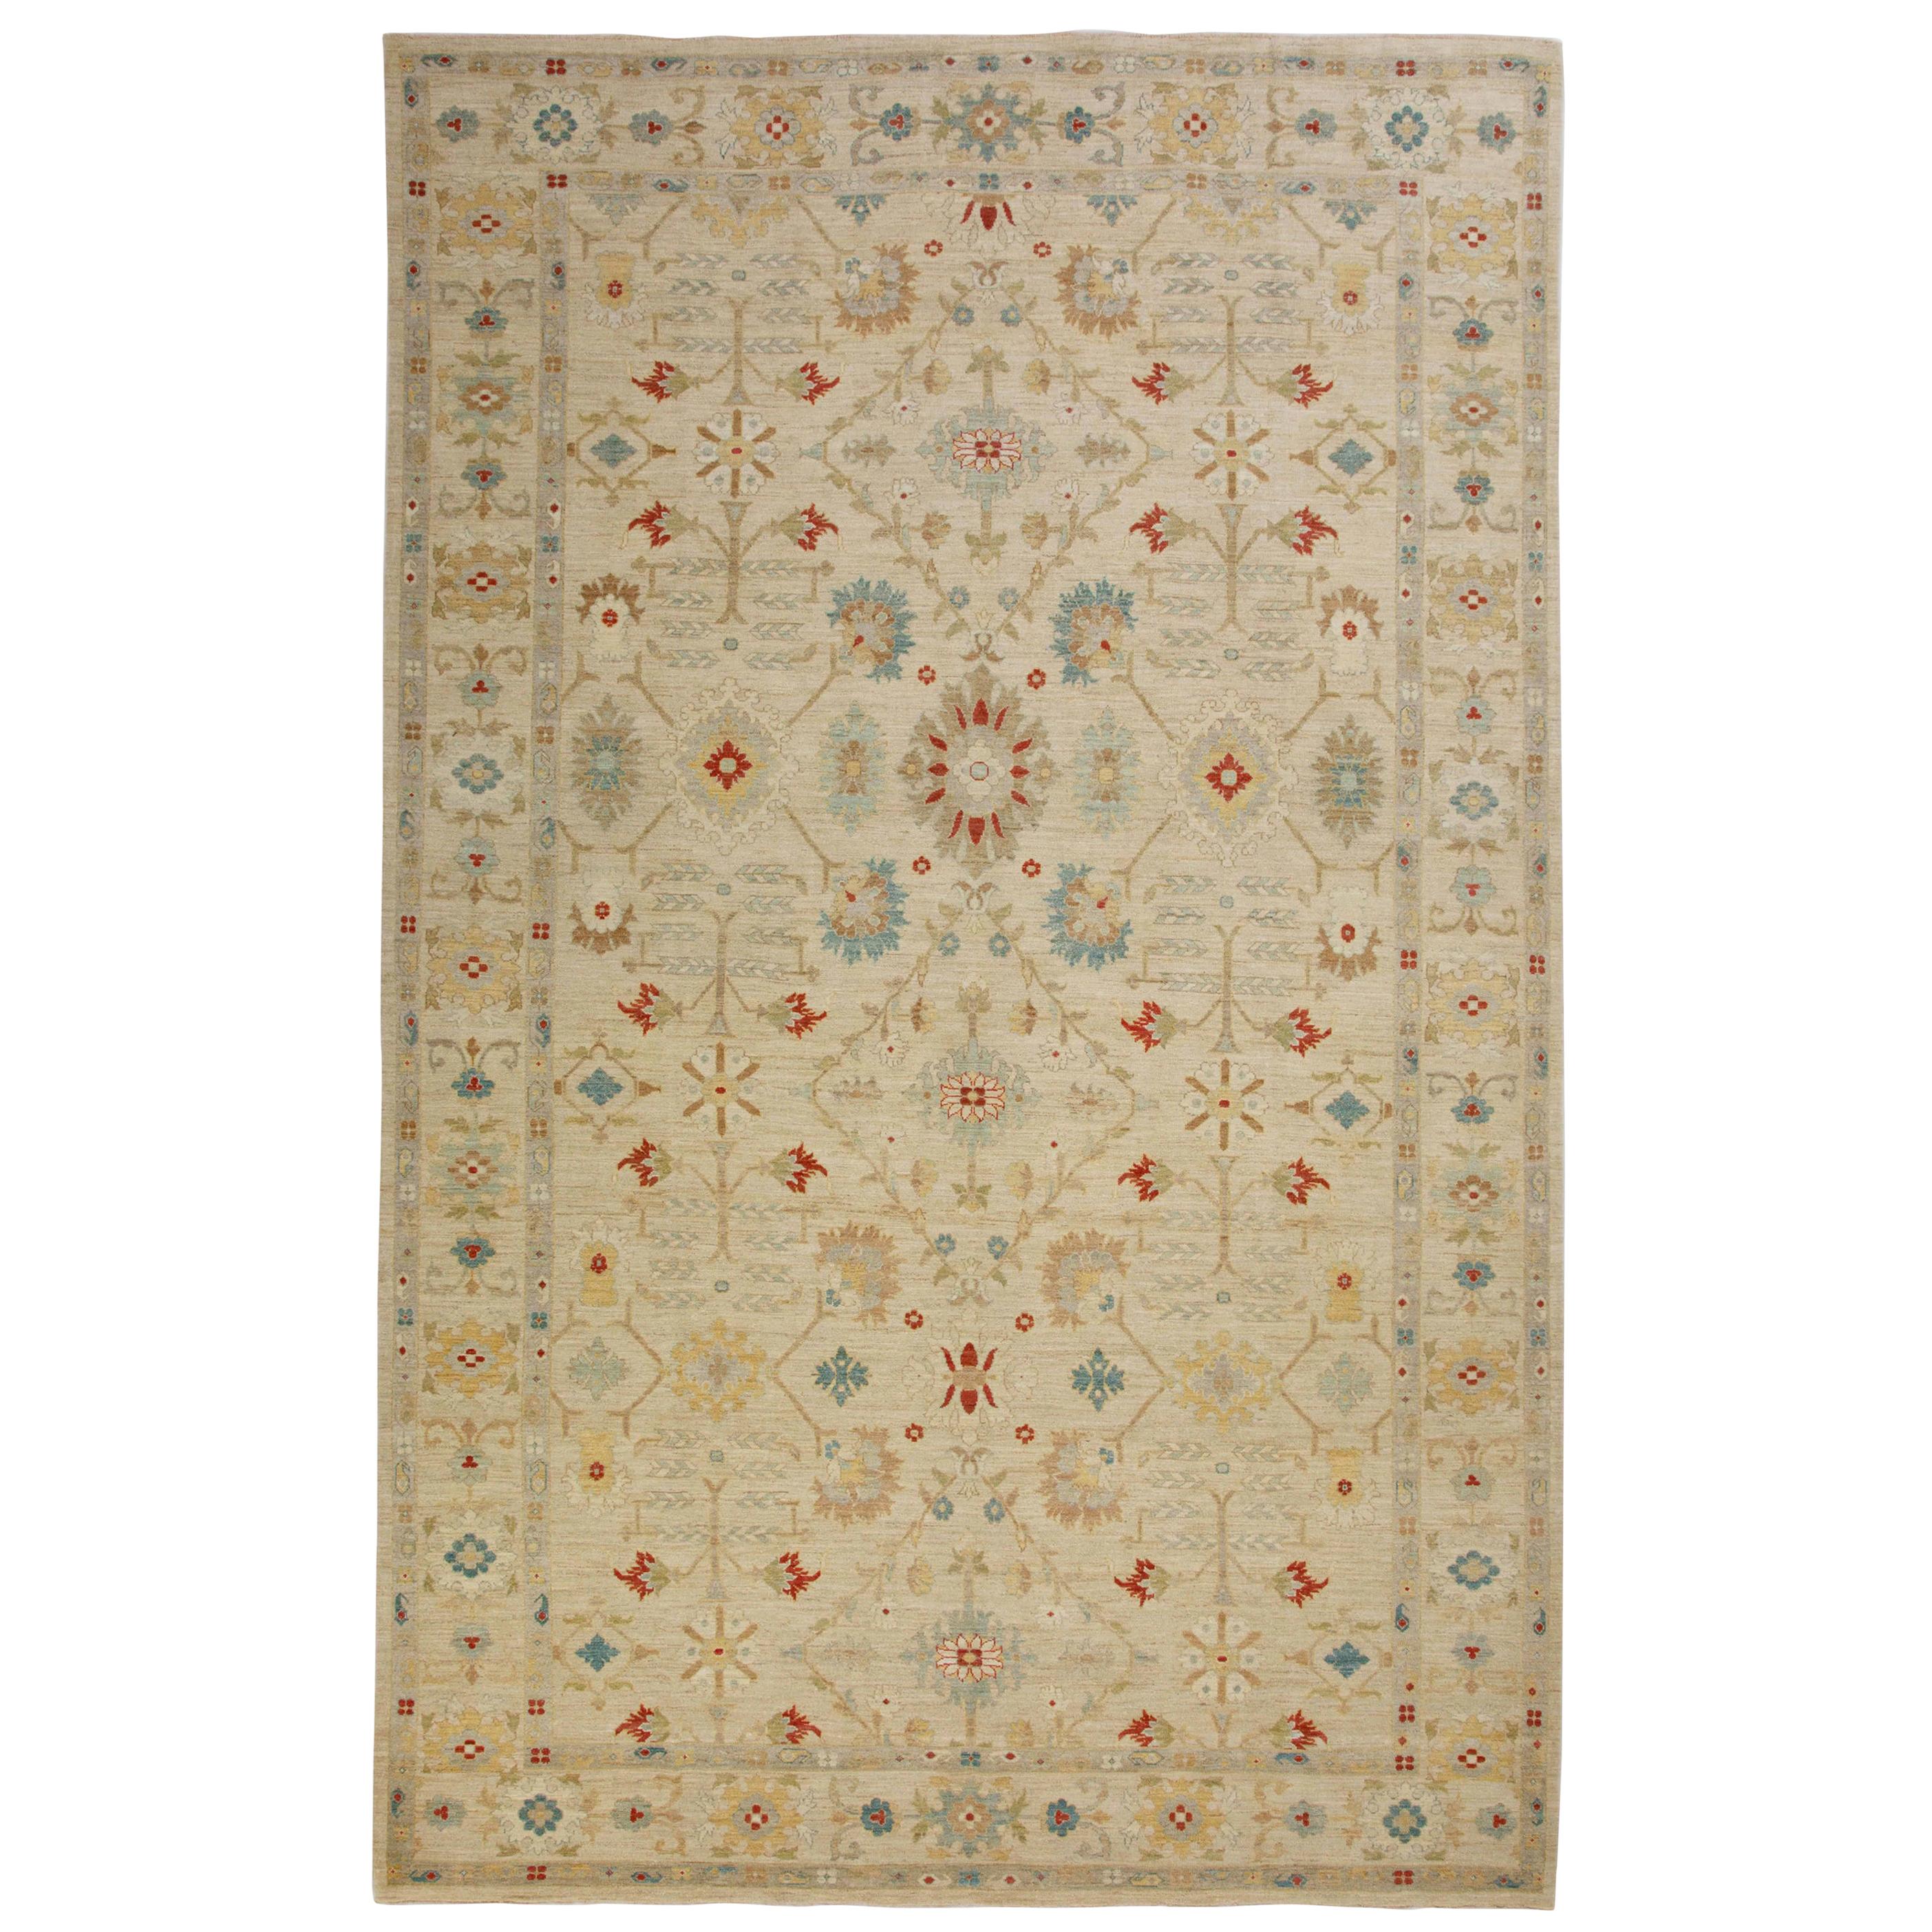 Contemporary Turkish Sultanabad Style Rug with Herati Patterns in Blue and Red